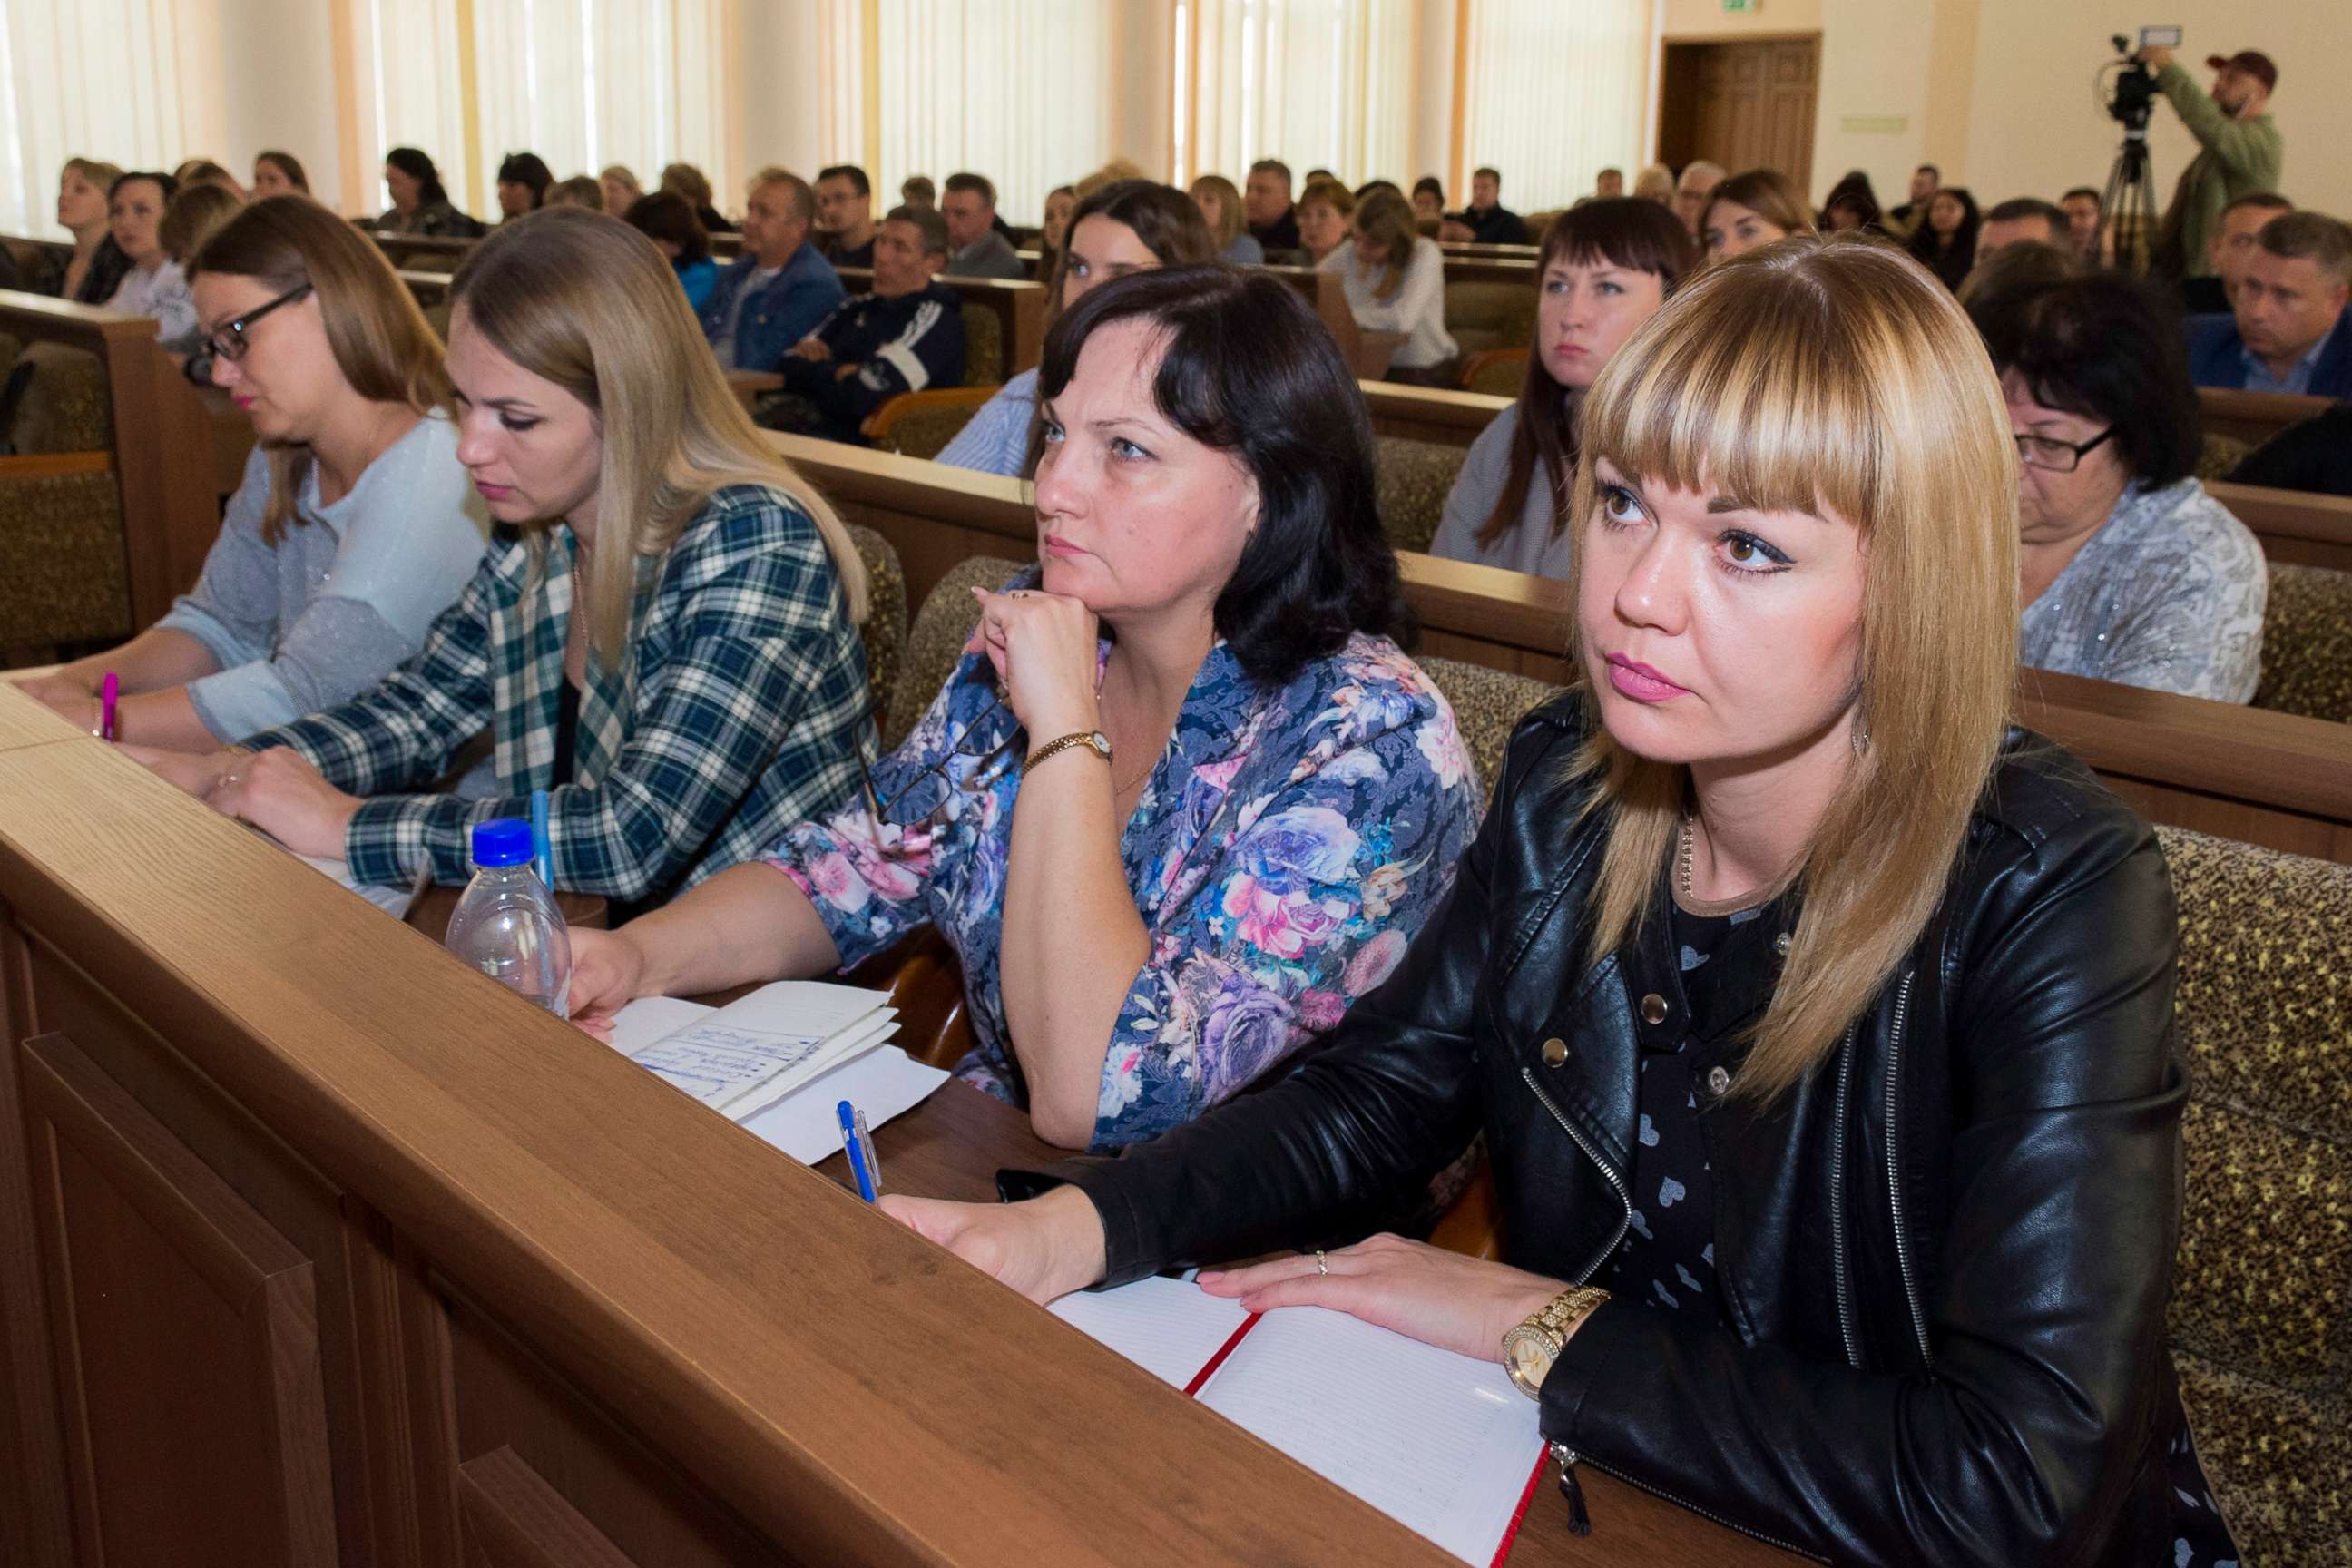 PHOTO: Members of the Luhansk regional election commission listen to a speaker as they plan to hold a referendum in Luhansk People's Republic controlled by Russia-backed separatists, in Luhansk, Ukraine, Sept. 21, 2022. 